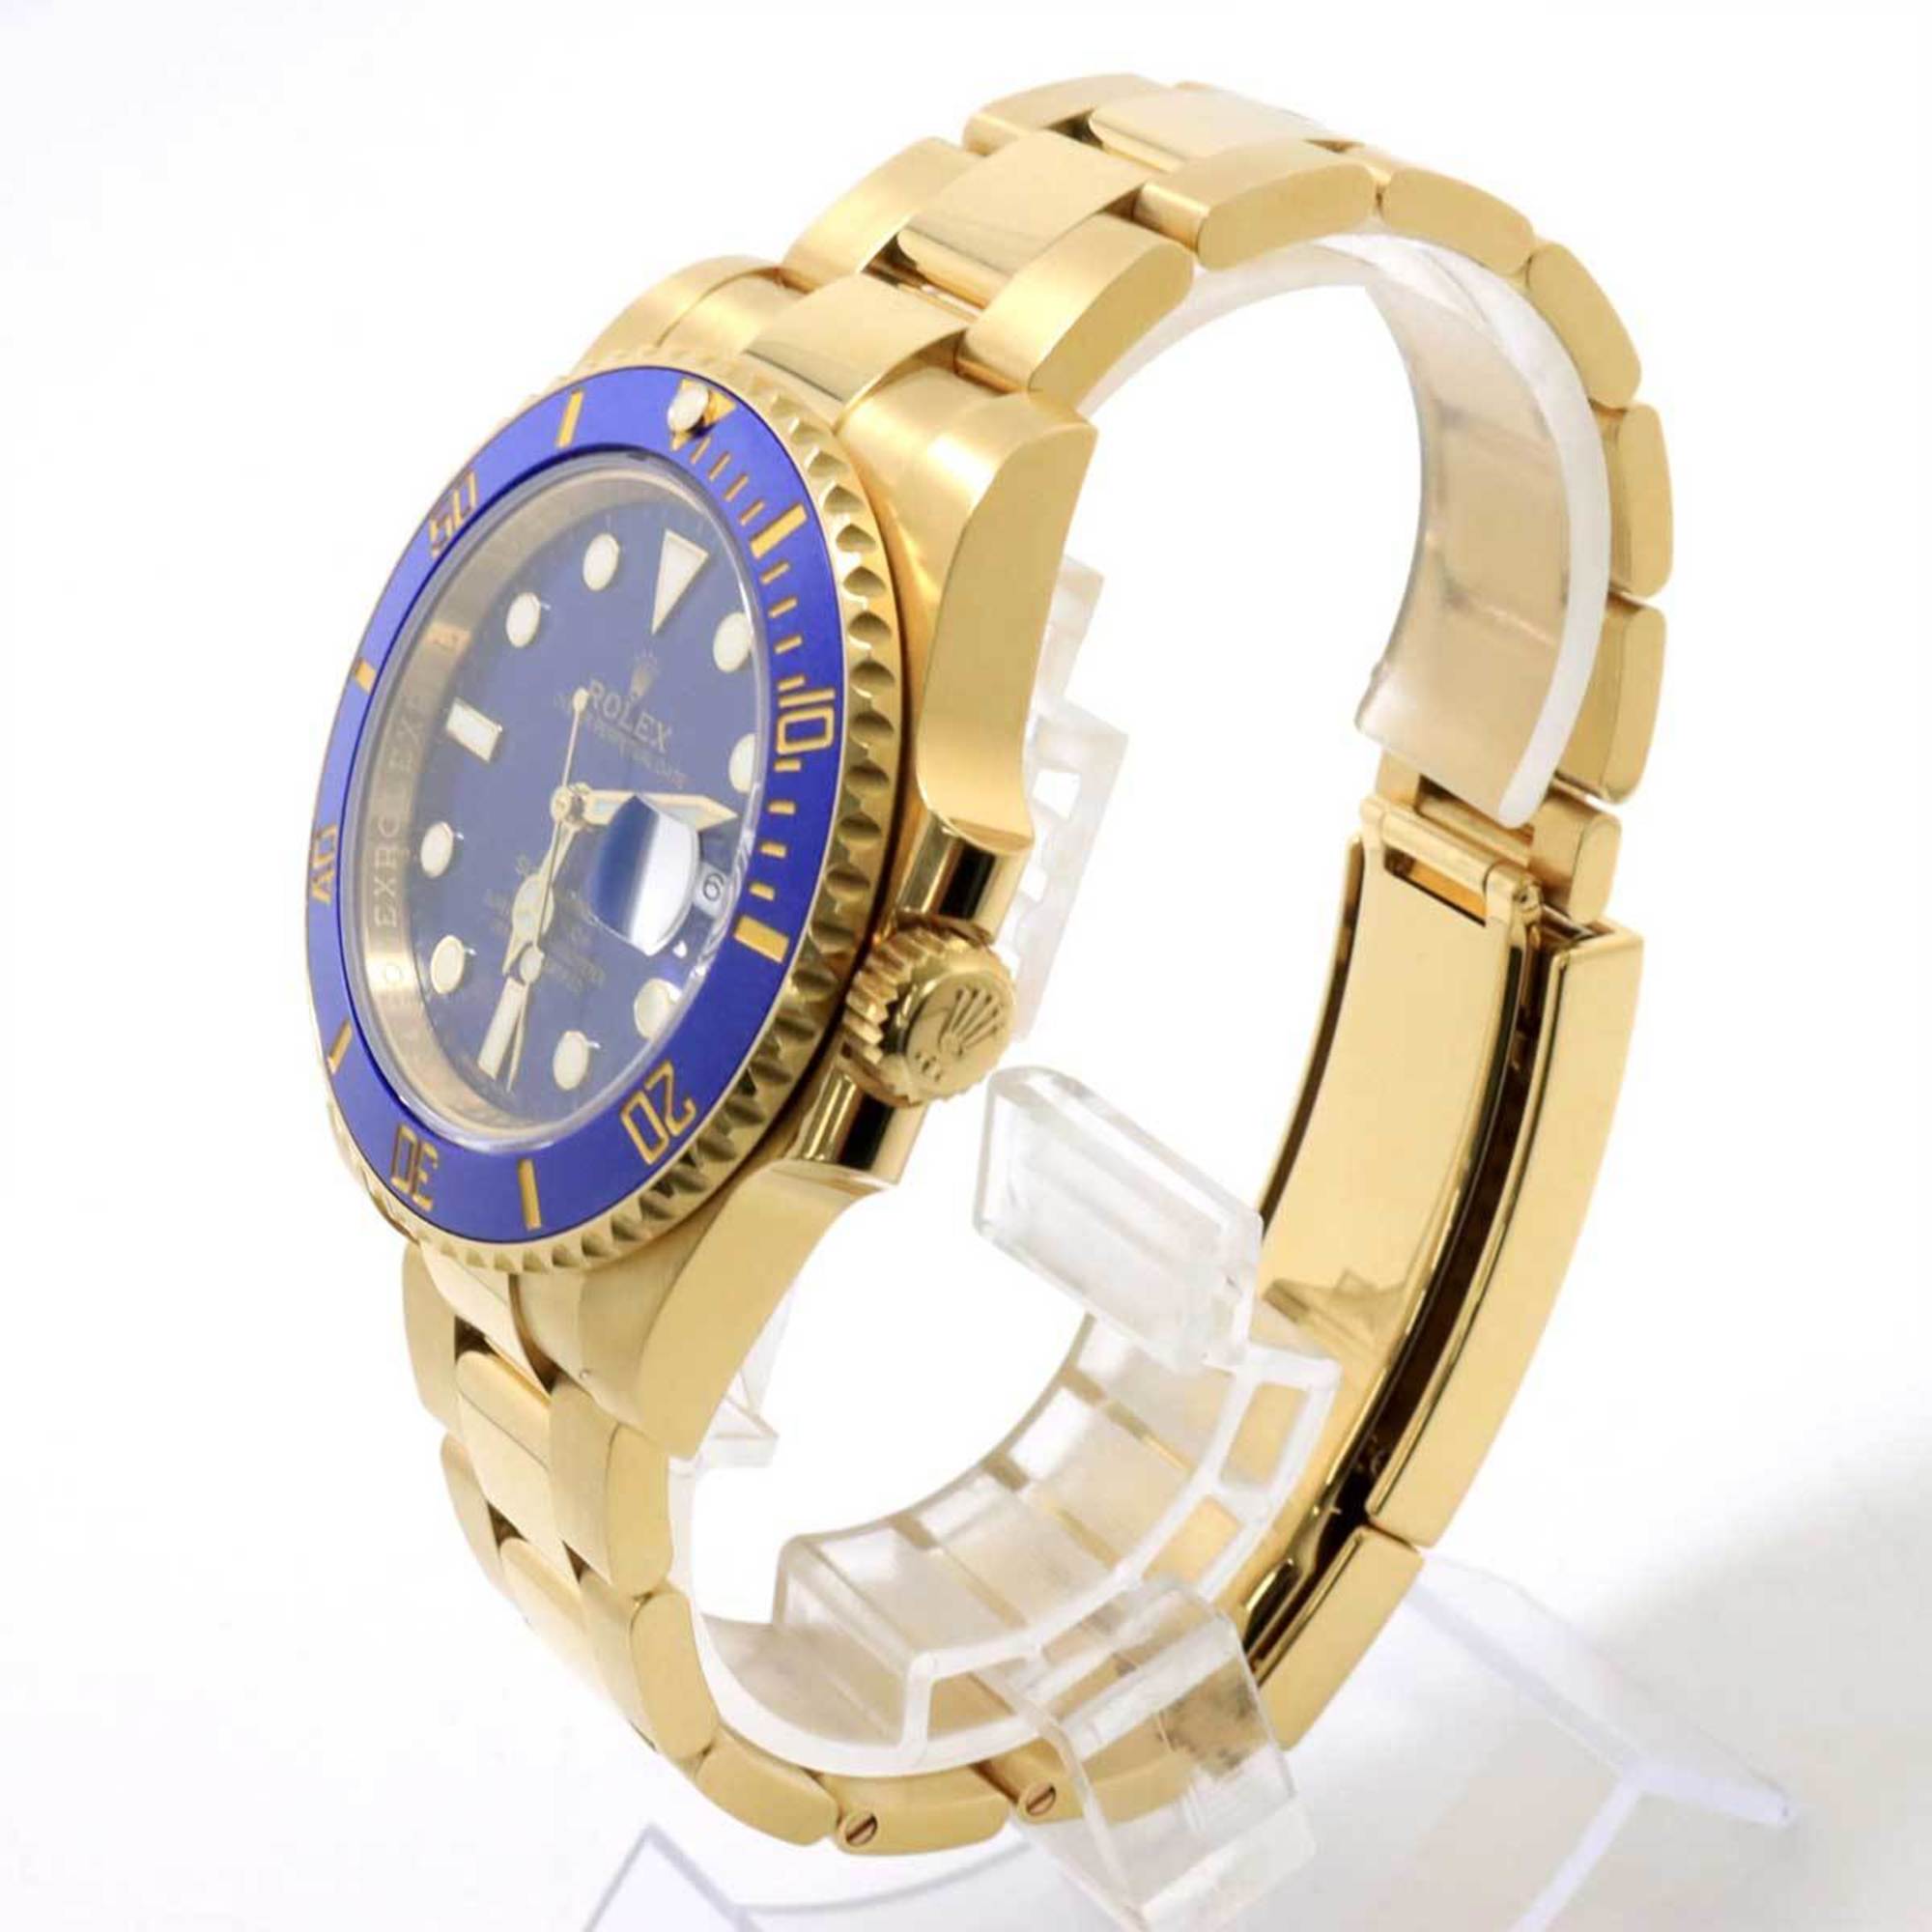 Rolex Submariner Date 116618LB Random Number Roulette Men's Watch Blue Dial K18YG Solid Gold Automatic